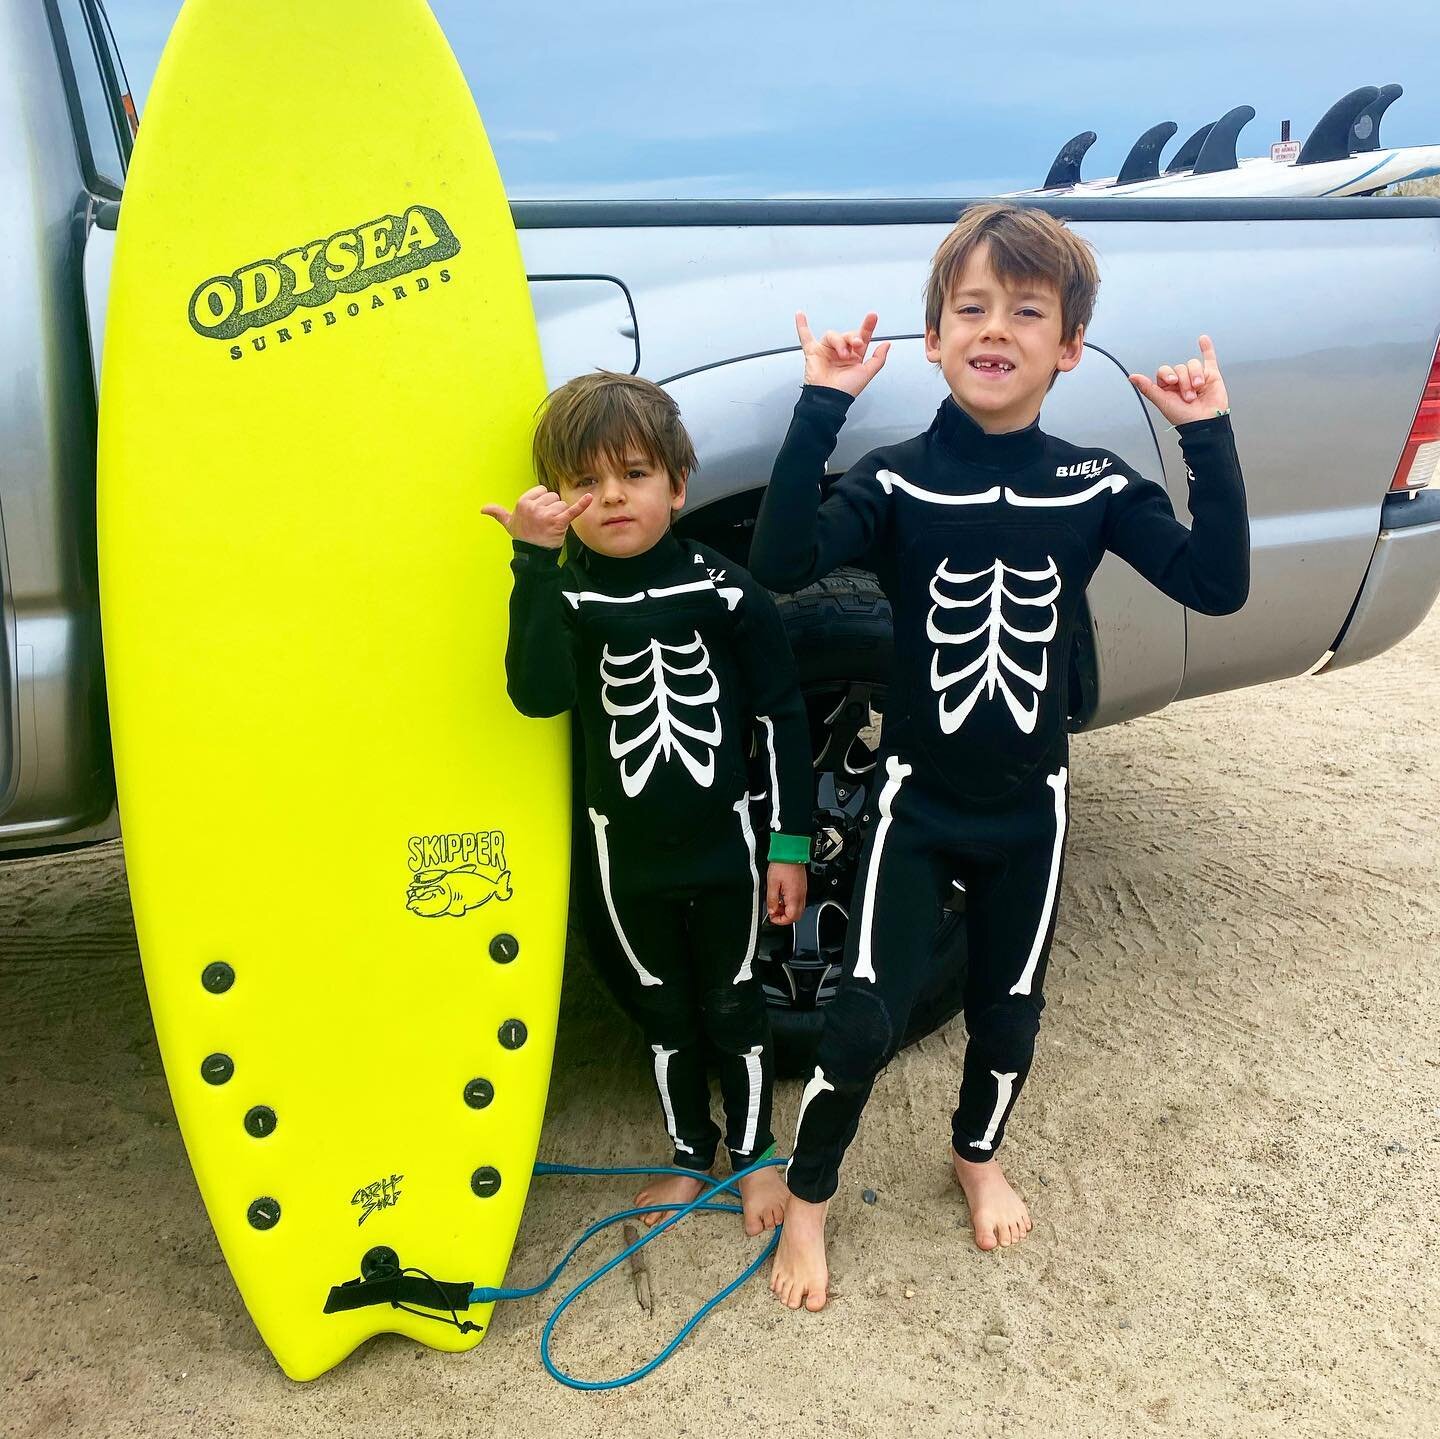 All the way from France my guys were ripping it up today!! 🇫🇷🤙🏽~
&bull;
&bull;
🎥- @bogetti0s 
#startemyoung #fallsurfsession #surflessons #montauk #gromsquad